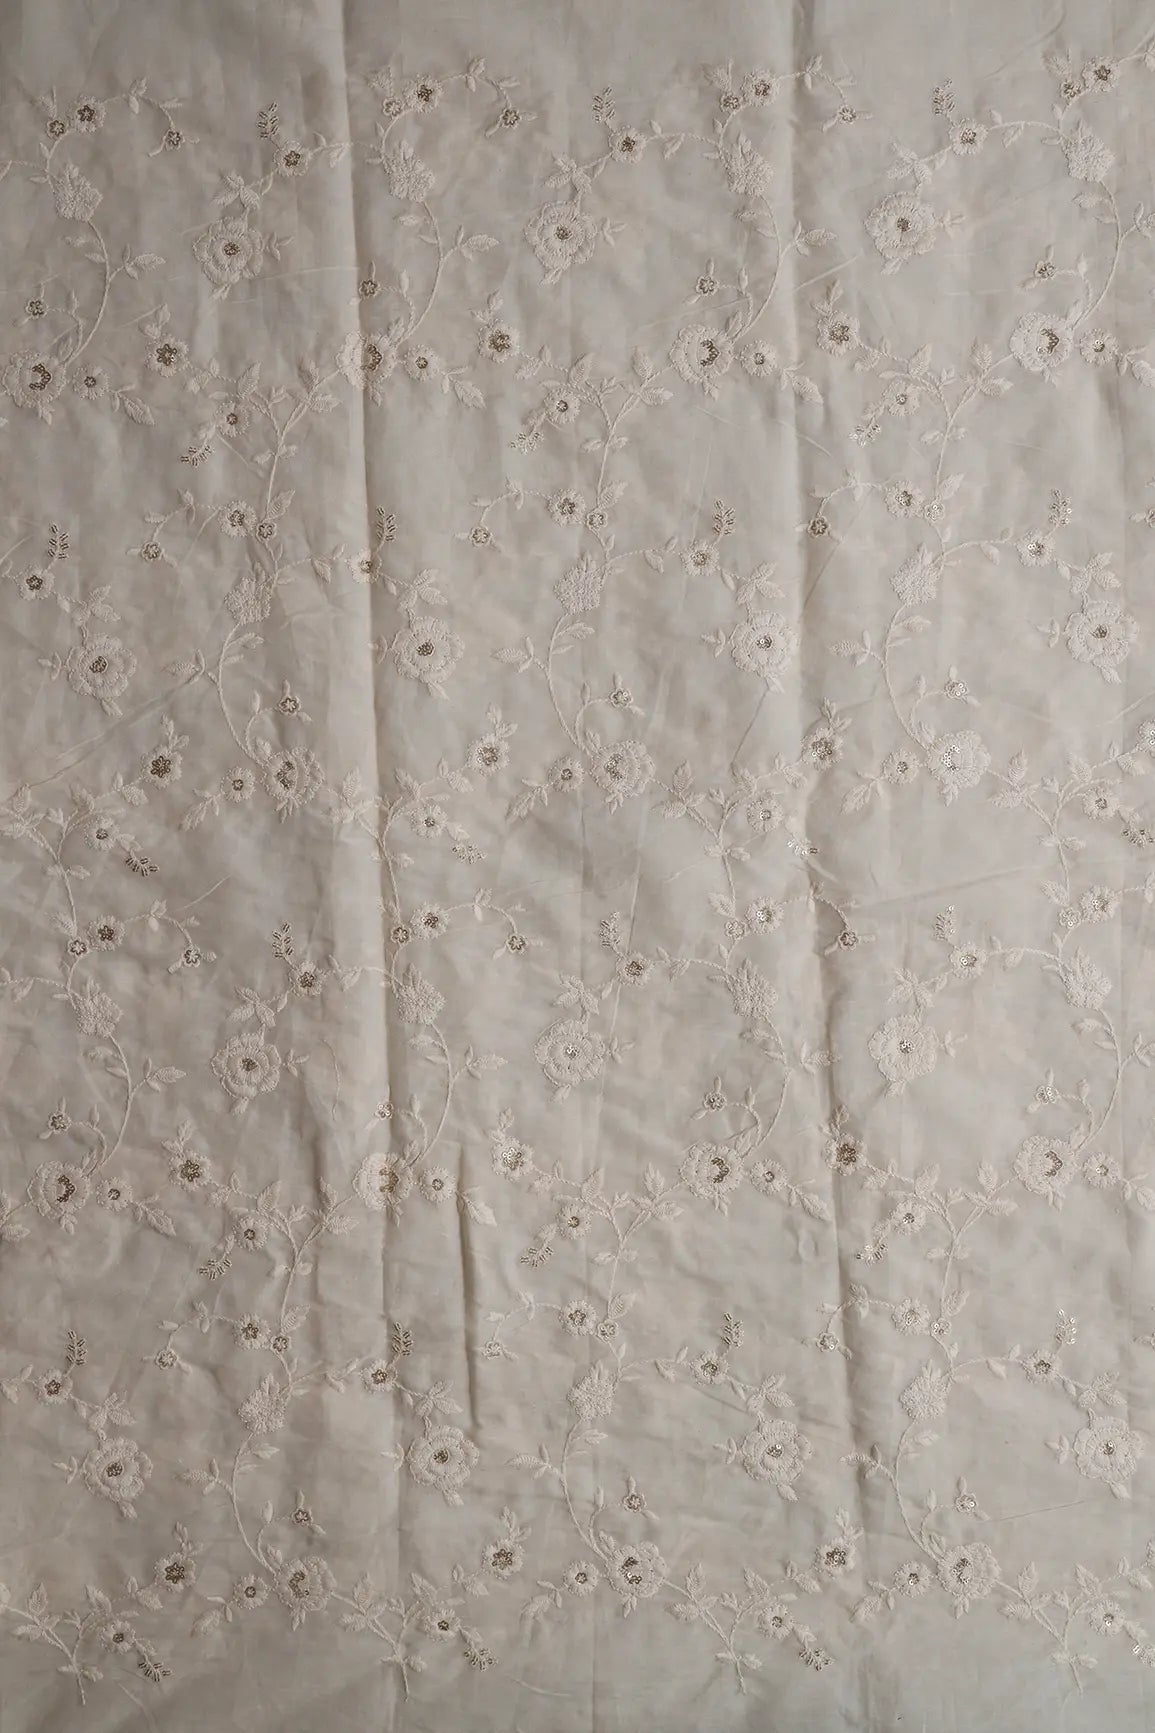 4 Meter Cut Piece Of White Thread With Sequins Floral Embroidery Work On Off White Organic Cotton Fabric - doeraa